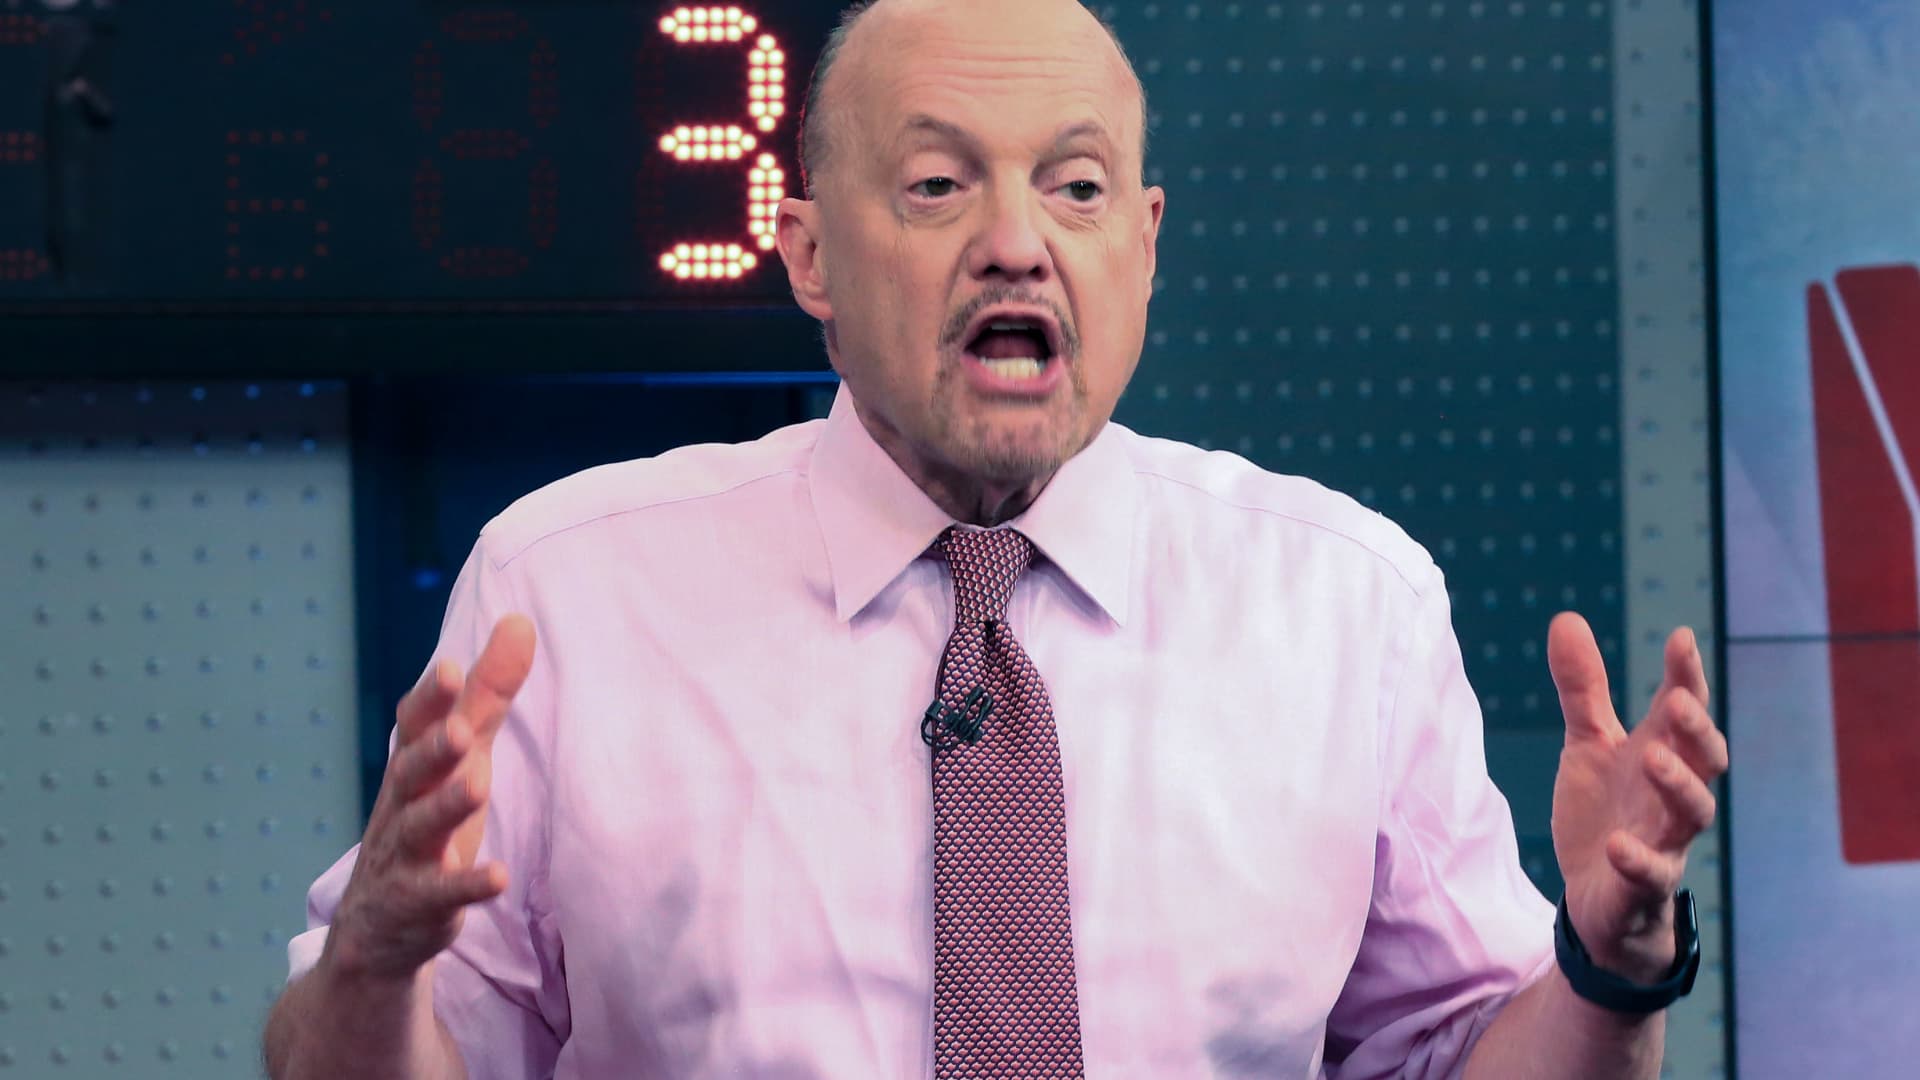 Jim Cramer says stubborn investors are taking the ‘wrong approach’ to the market